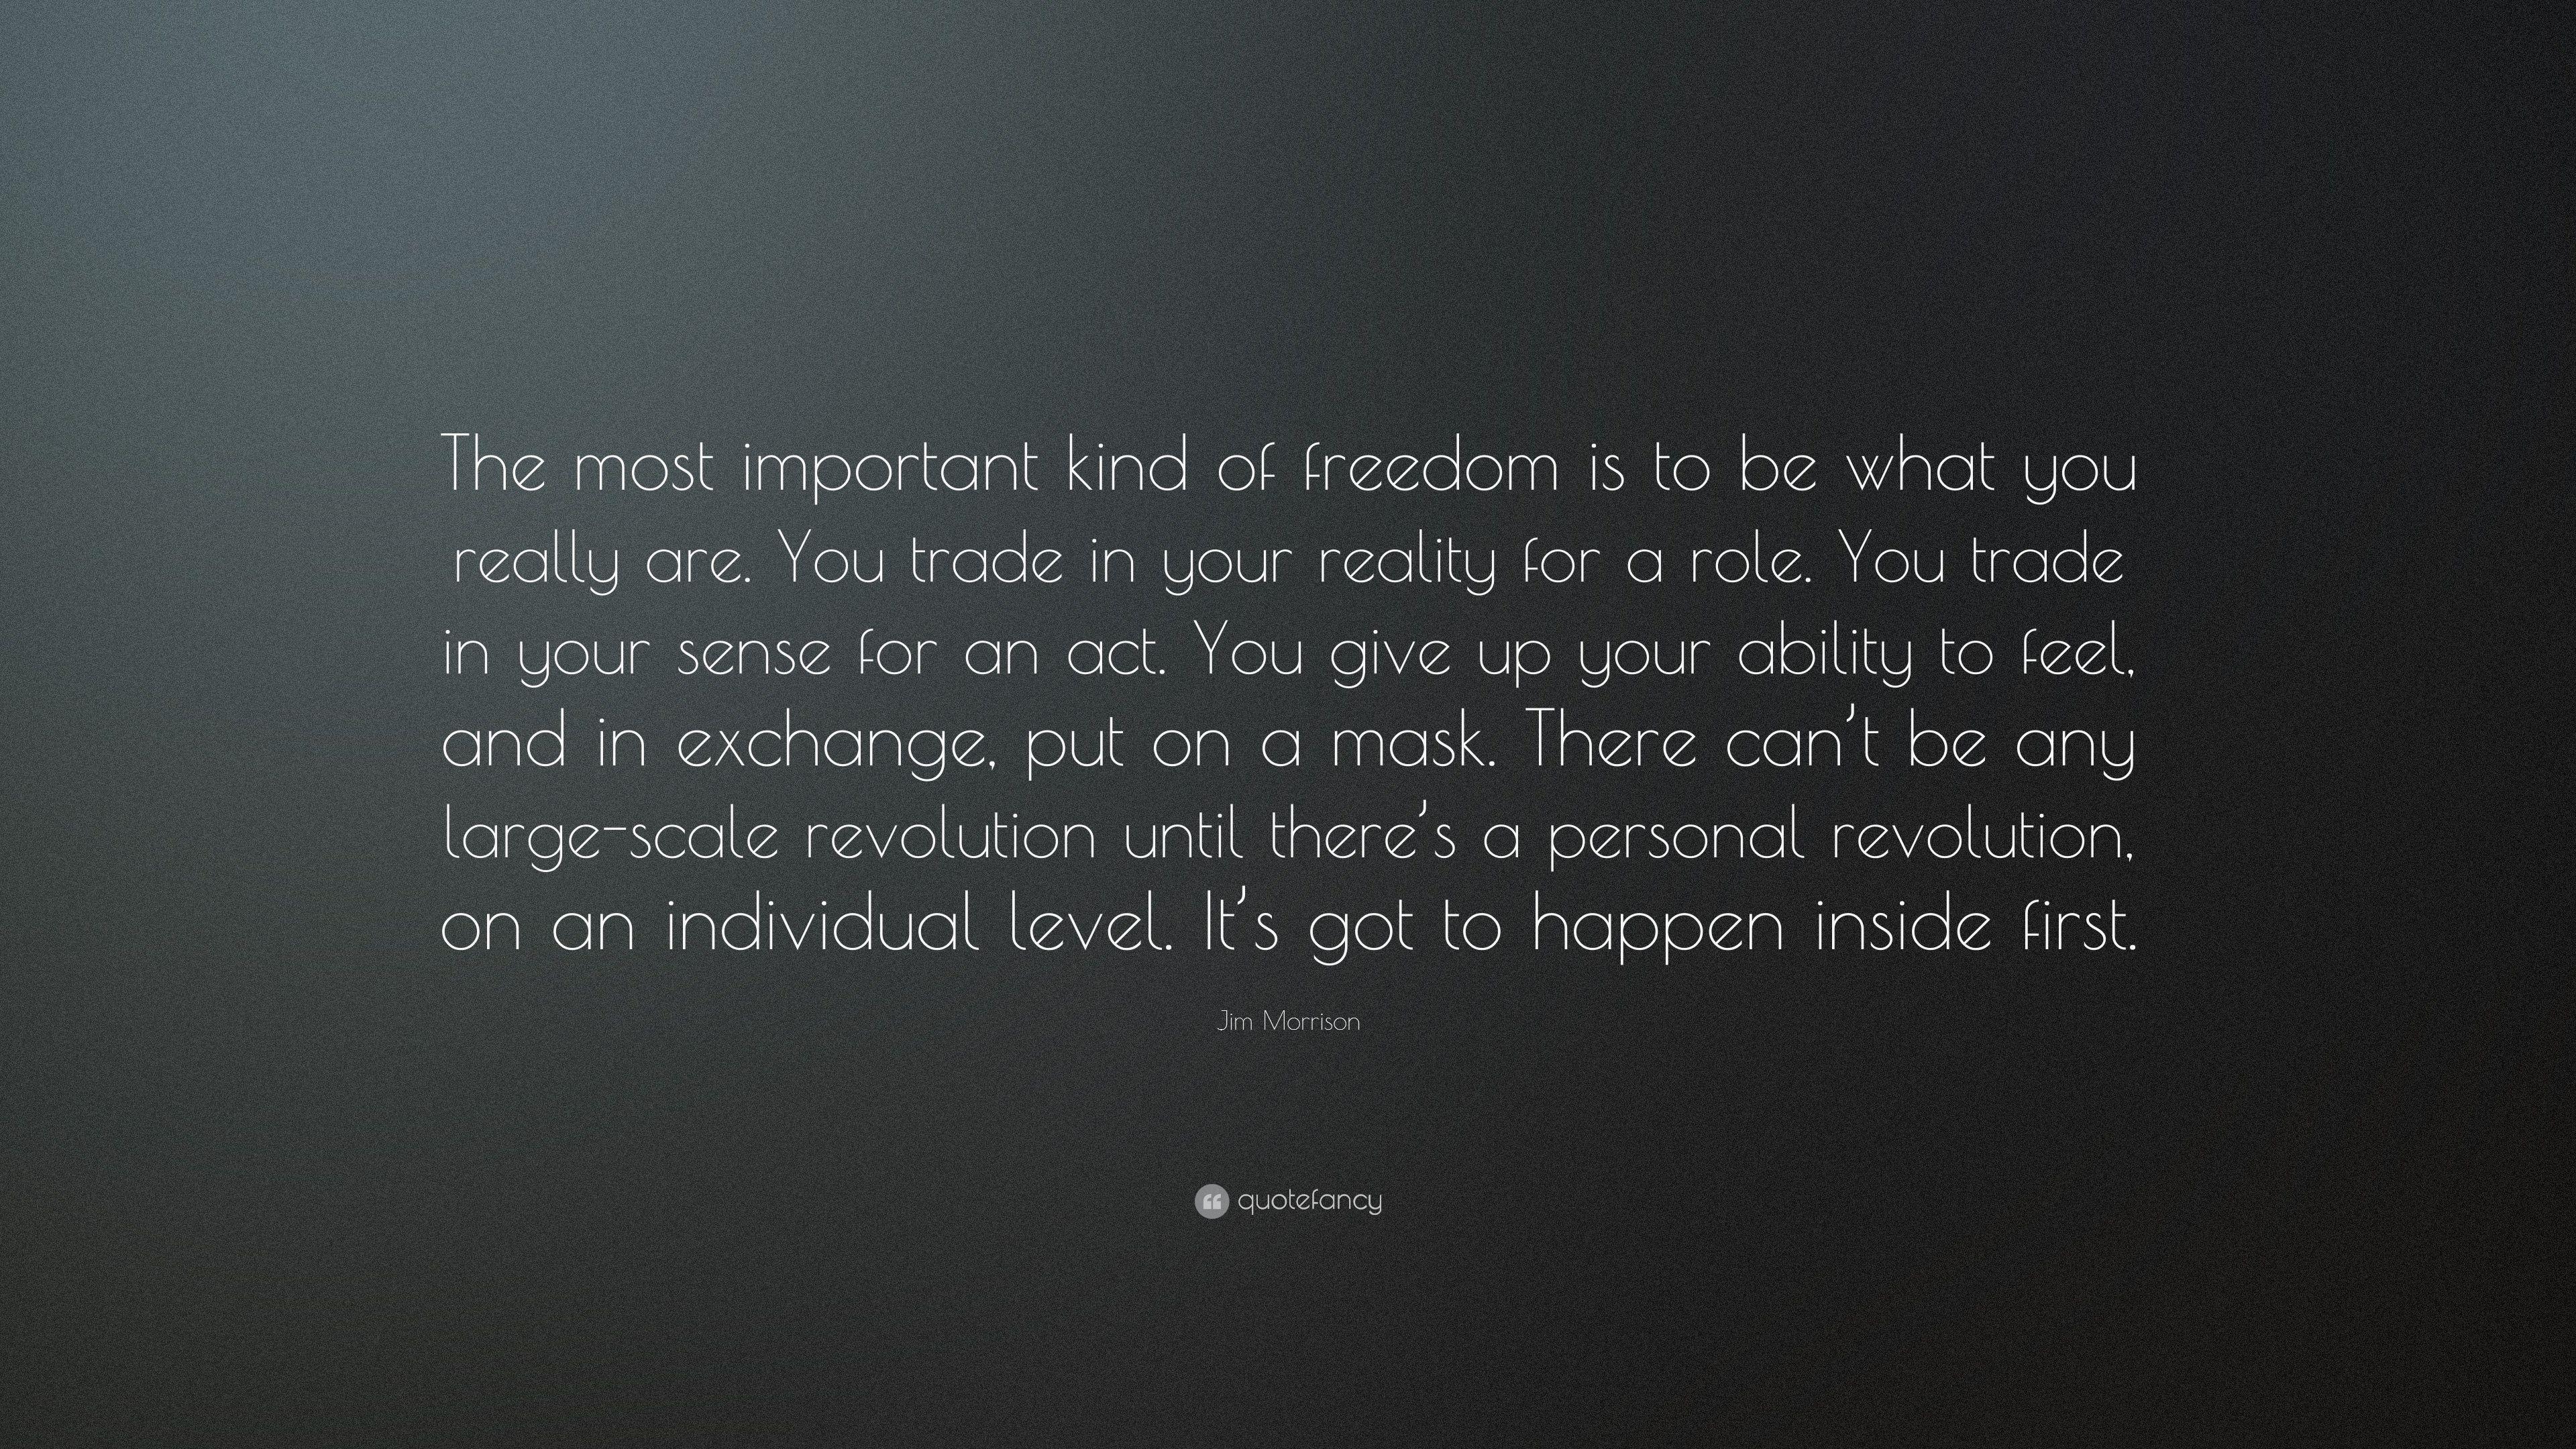 Jim Morrison Quote: “The most important kind of freedom is to be